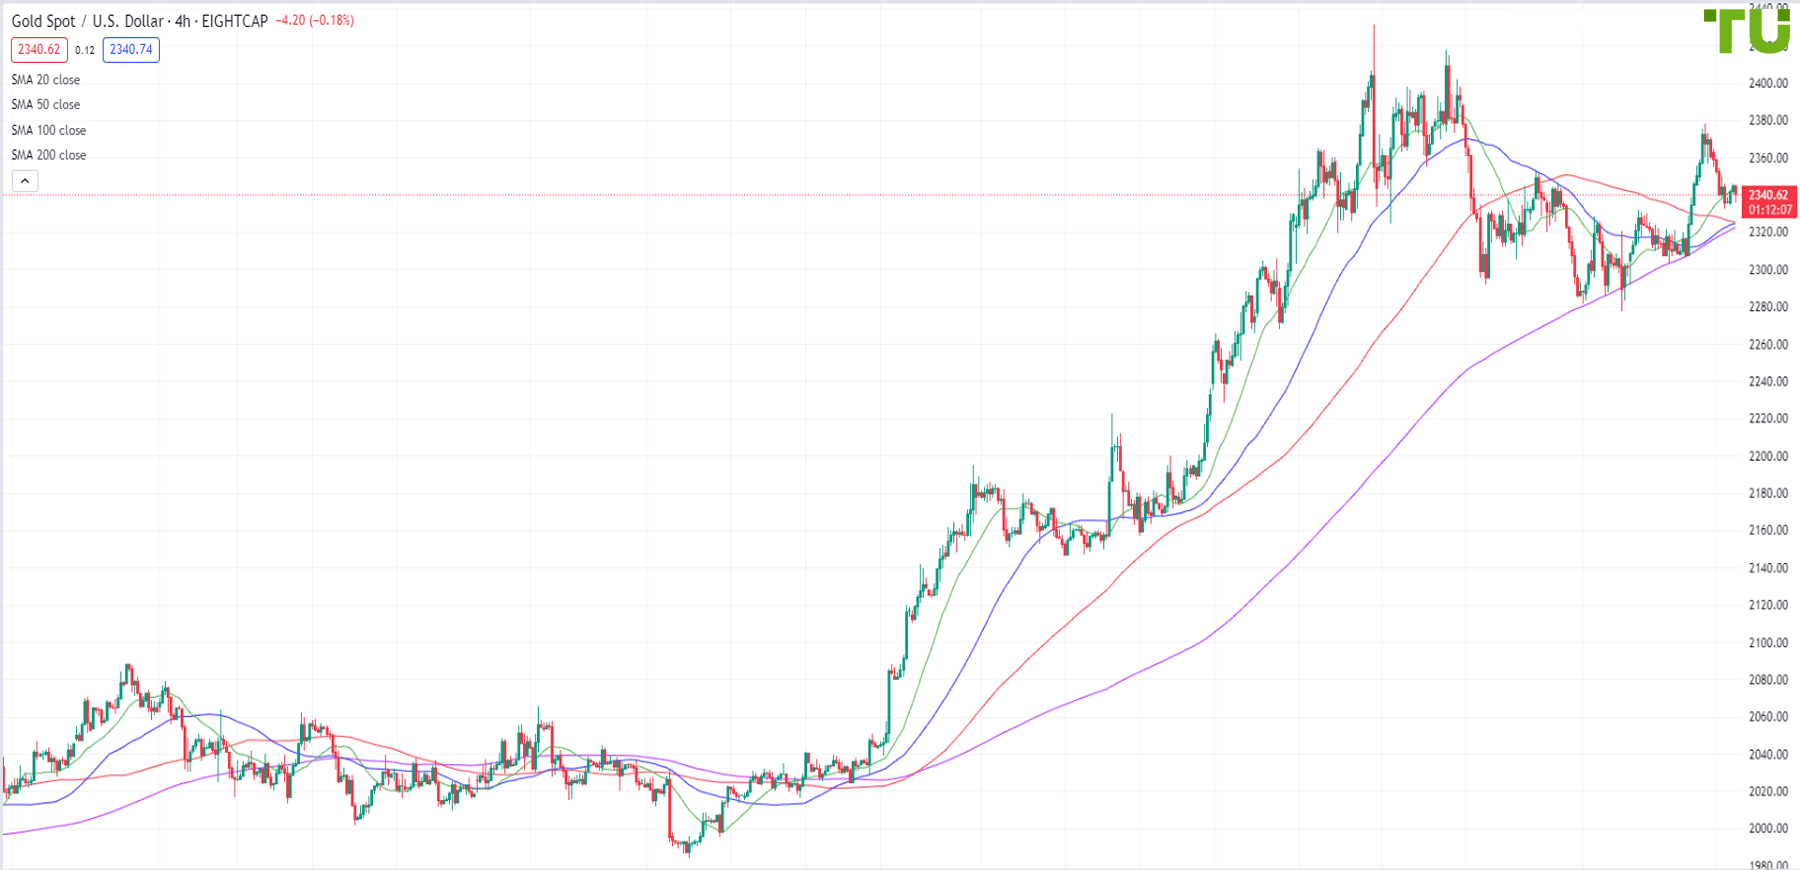 XAU/USD tests support at ,335 per ounce